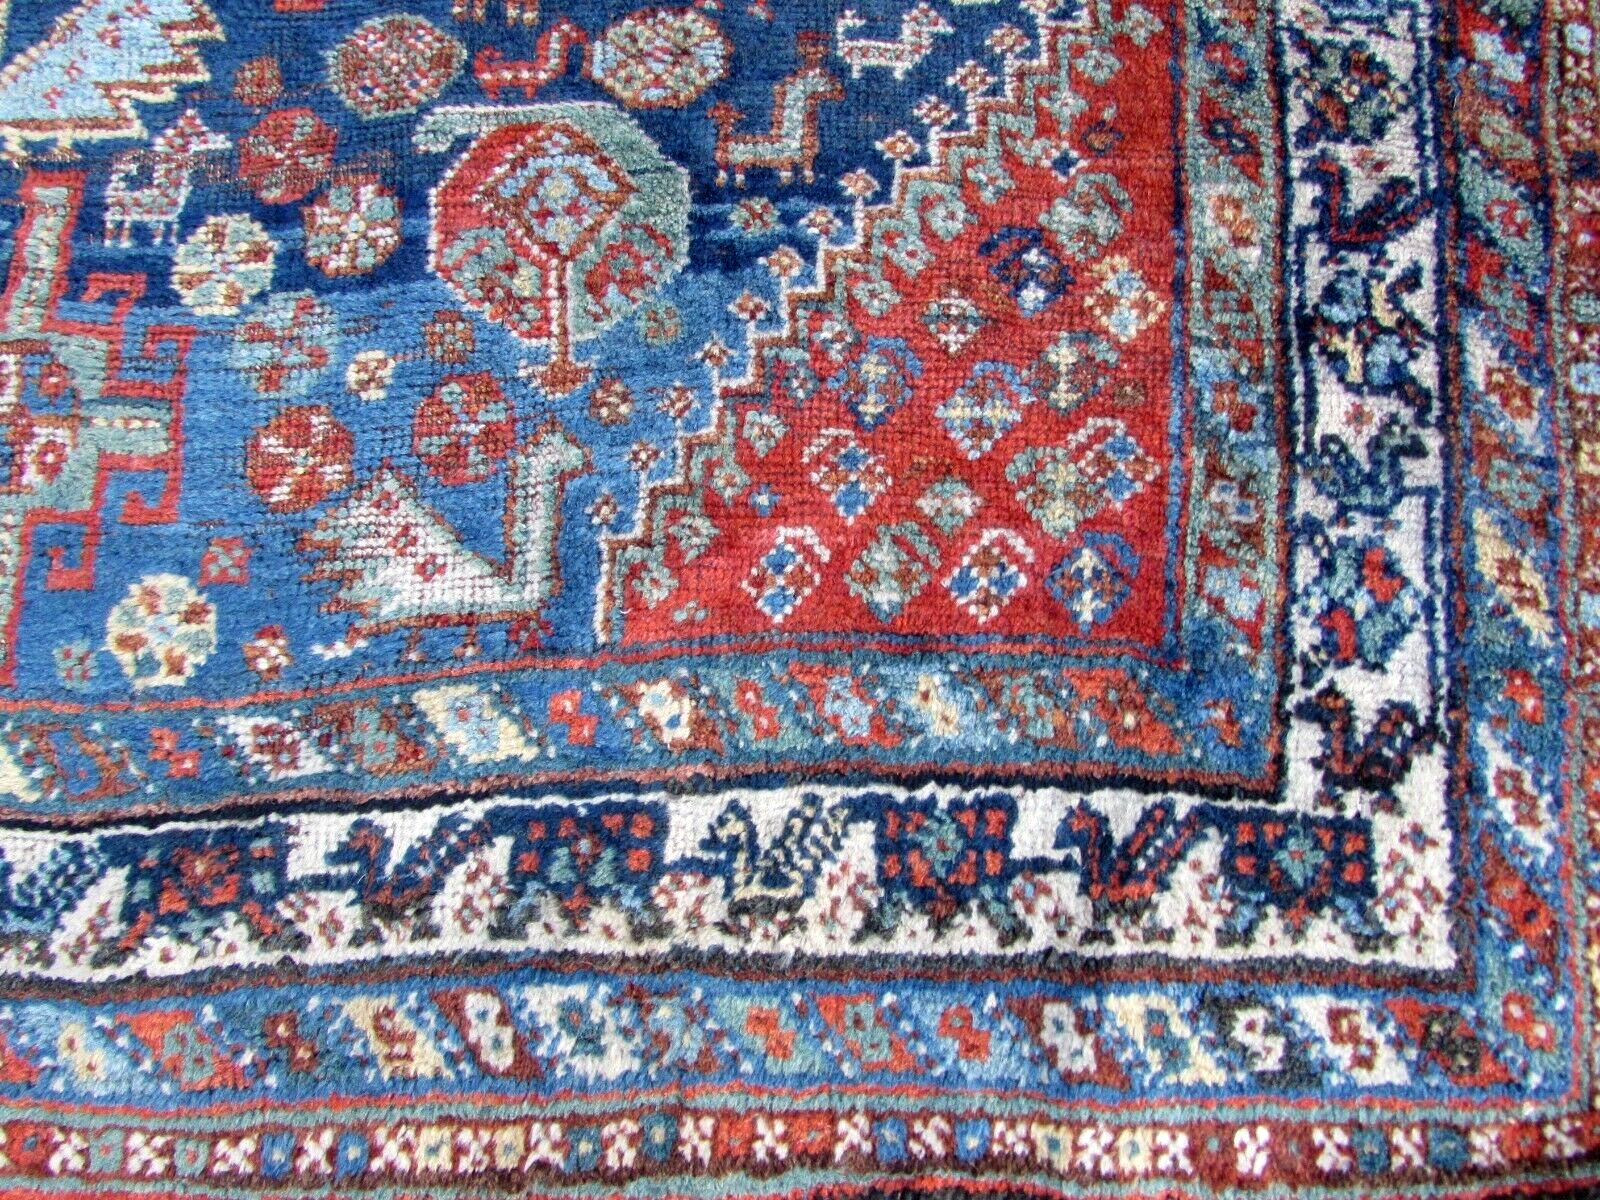 Detailed view of the vibrant red, blue, and white colors used in Shiraz style rug.